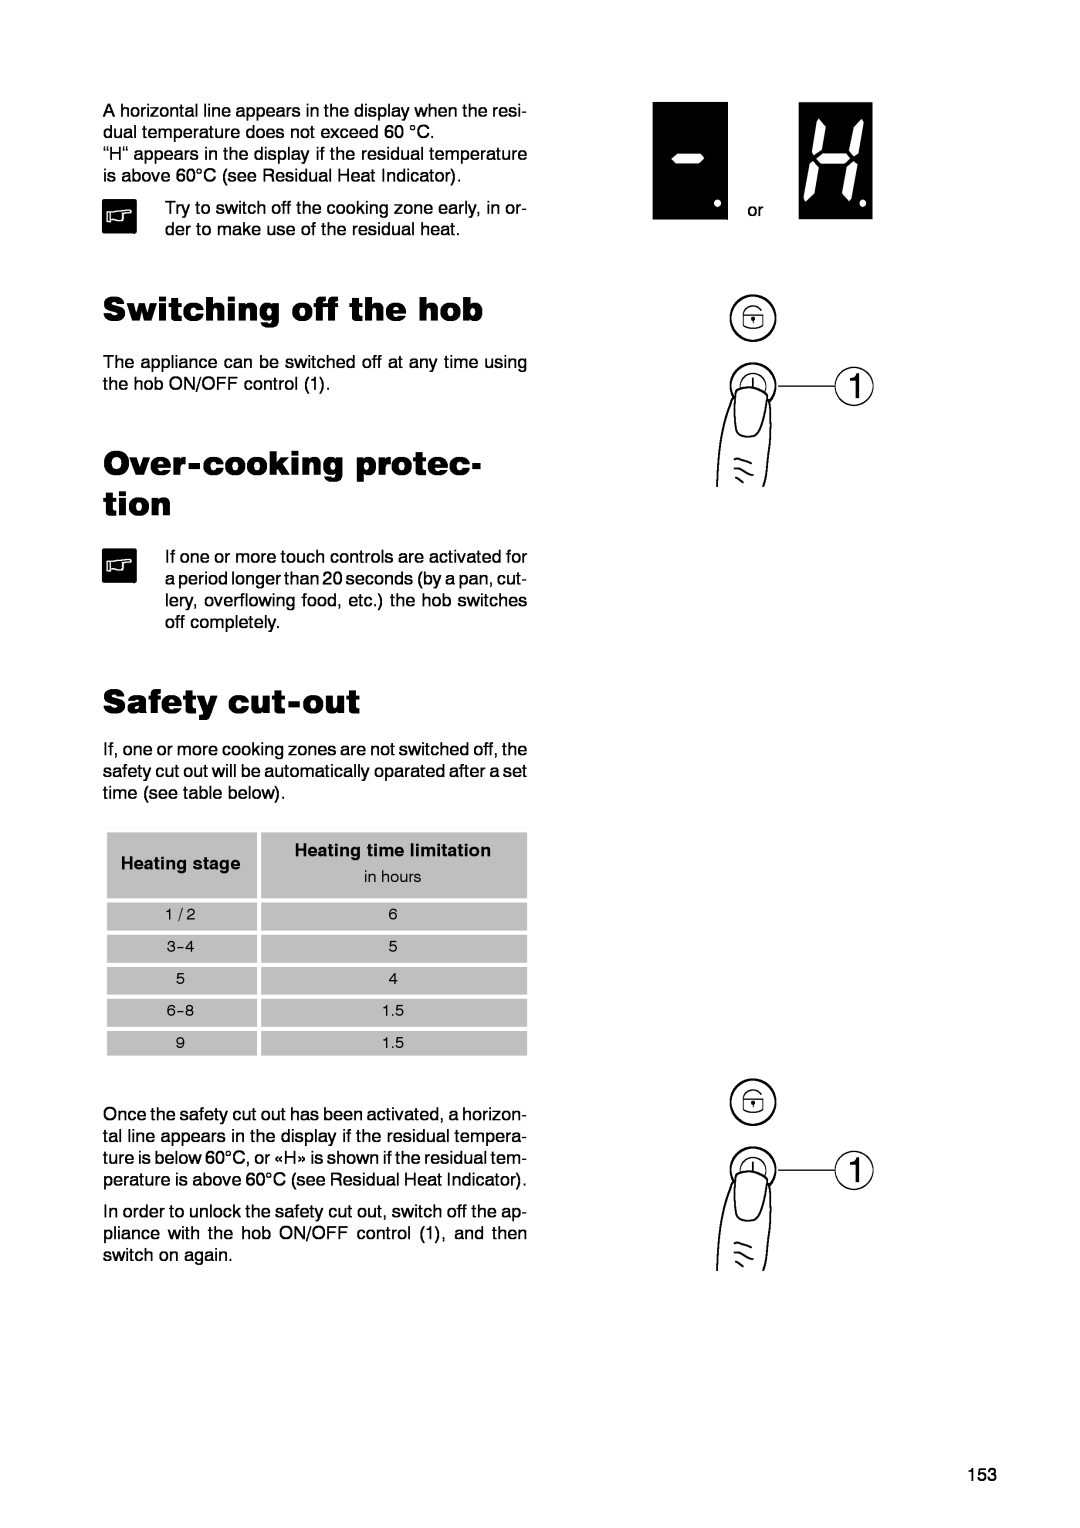 Zanussi ZKT 662 LN Switching off the hob, Over-cookingprotec- tion, Safety cut-out, Heating stage, Heating time limitation 